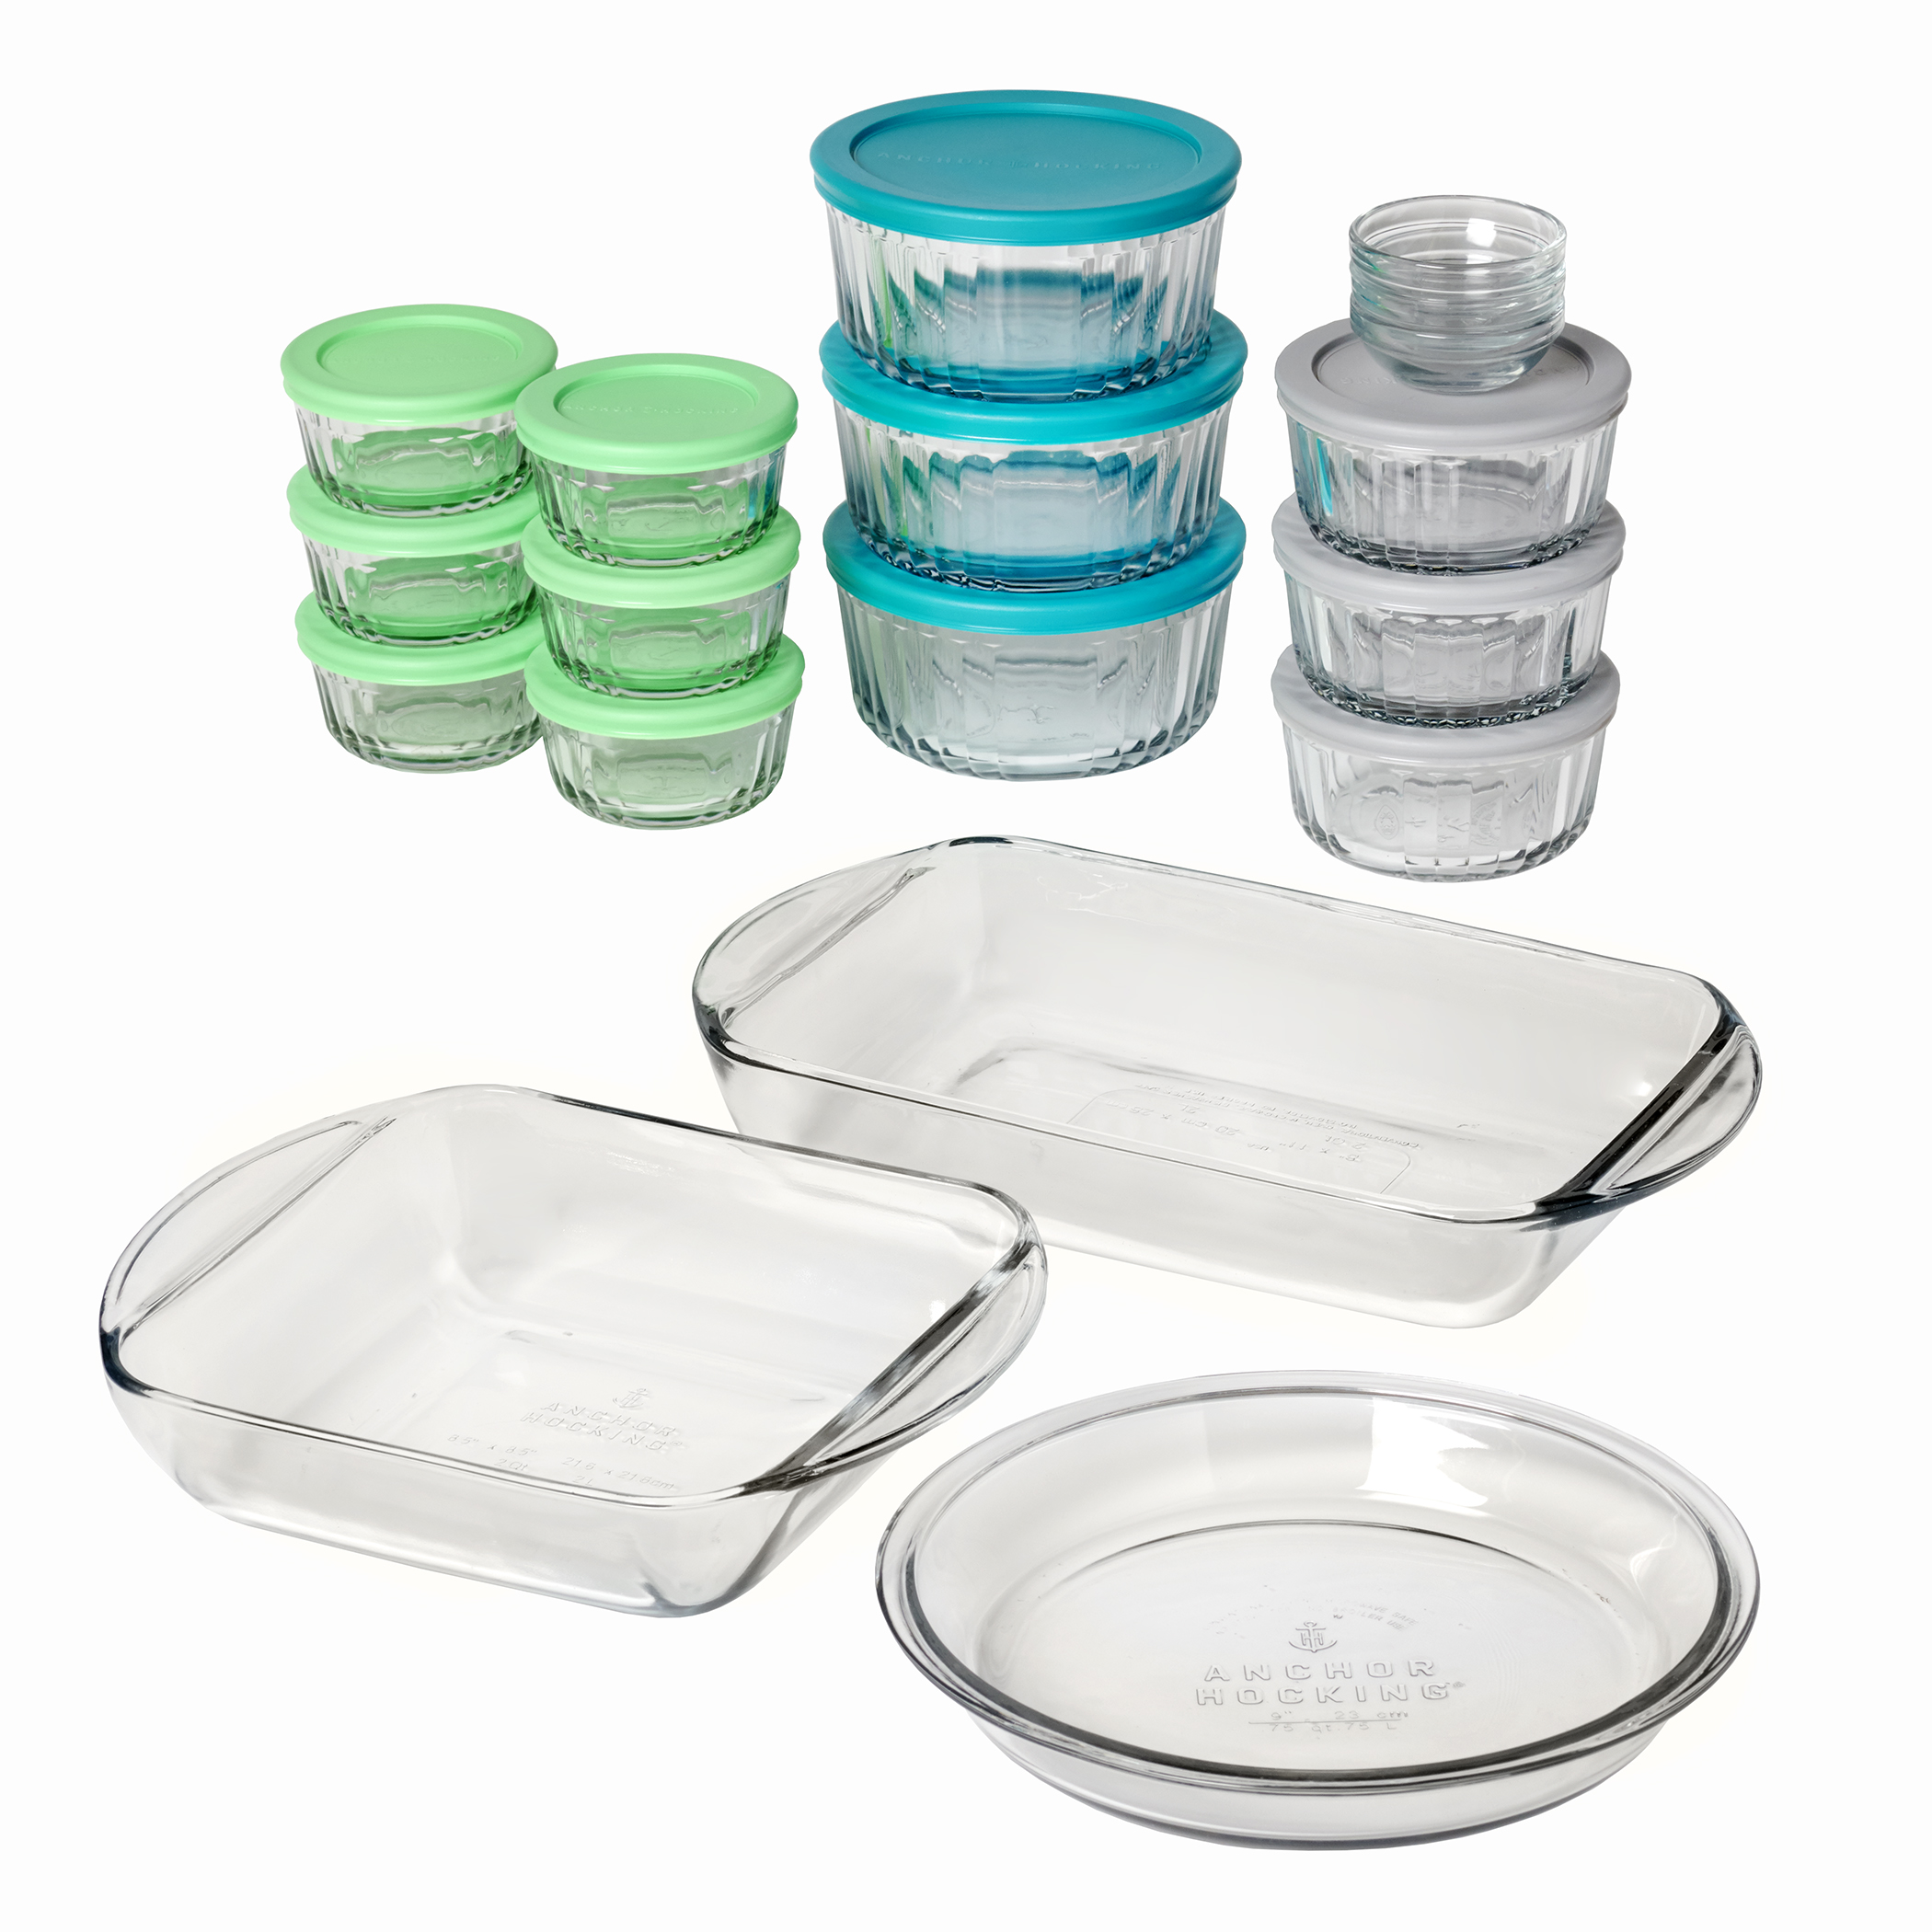 Anchor Hocking 30 Piece Glass Food Storage Containers & Glass Baking Dishes Set - image 1 of 4